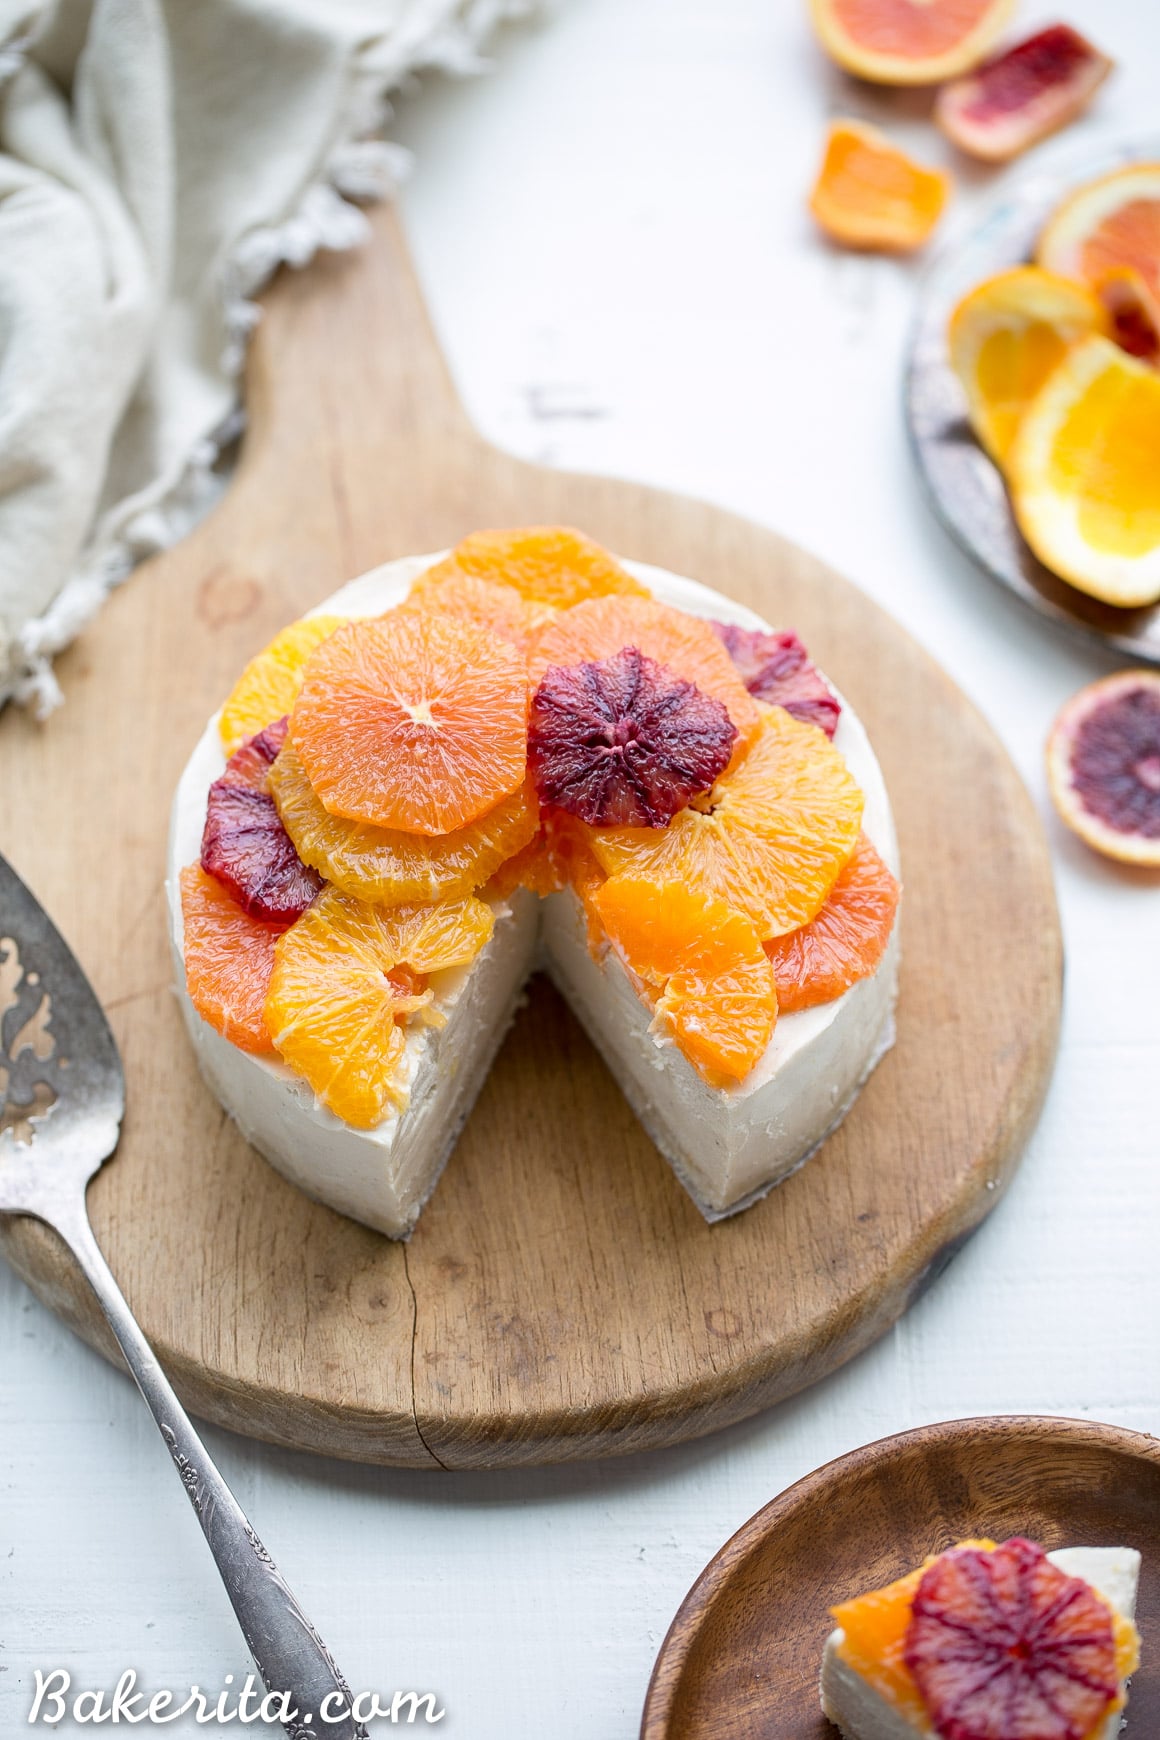 This No-Bake Lemon Cheesecake is a cashew-based raw, vegan, and Paleo cheesecake adorned with slices of juicy citrus. It's incredibly creamy, a little tangy, and lightly sweetened with maple syrup.